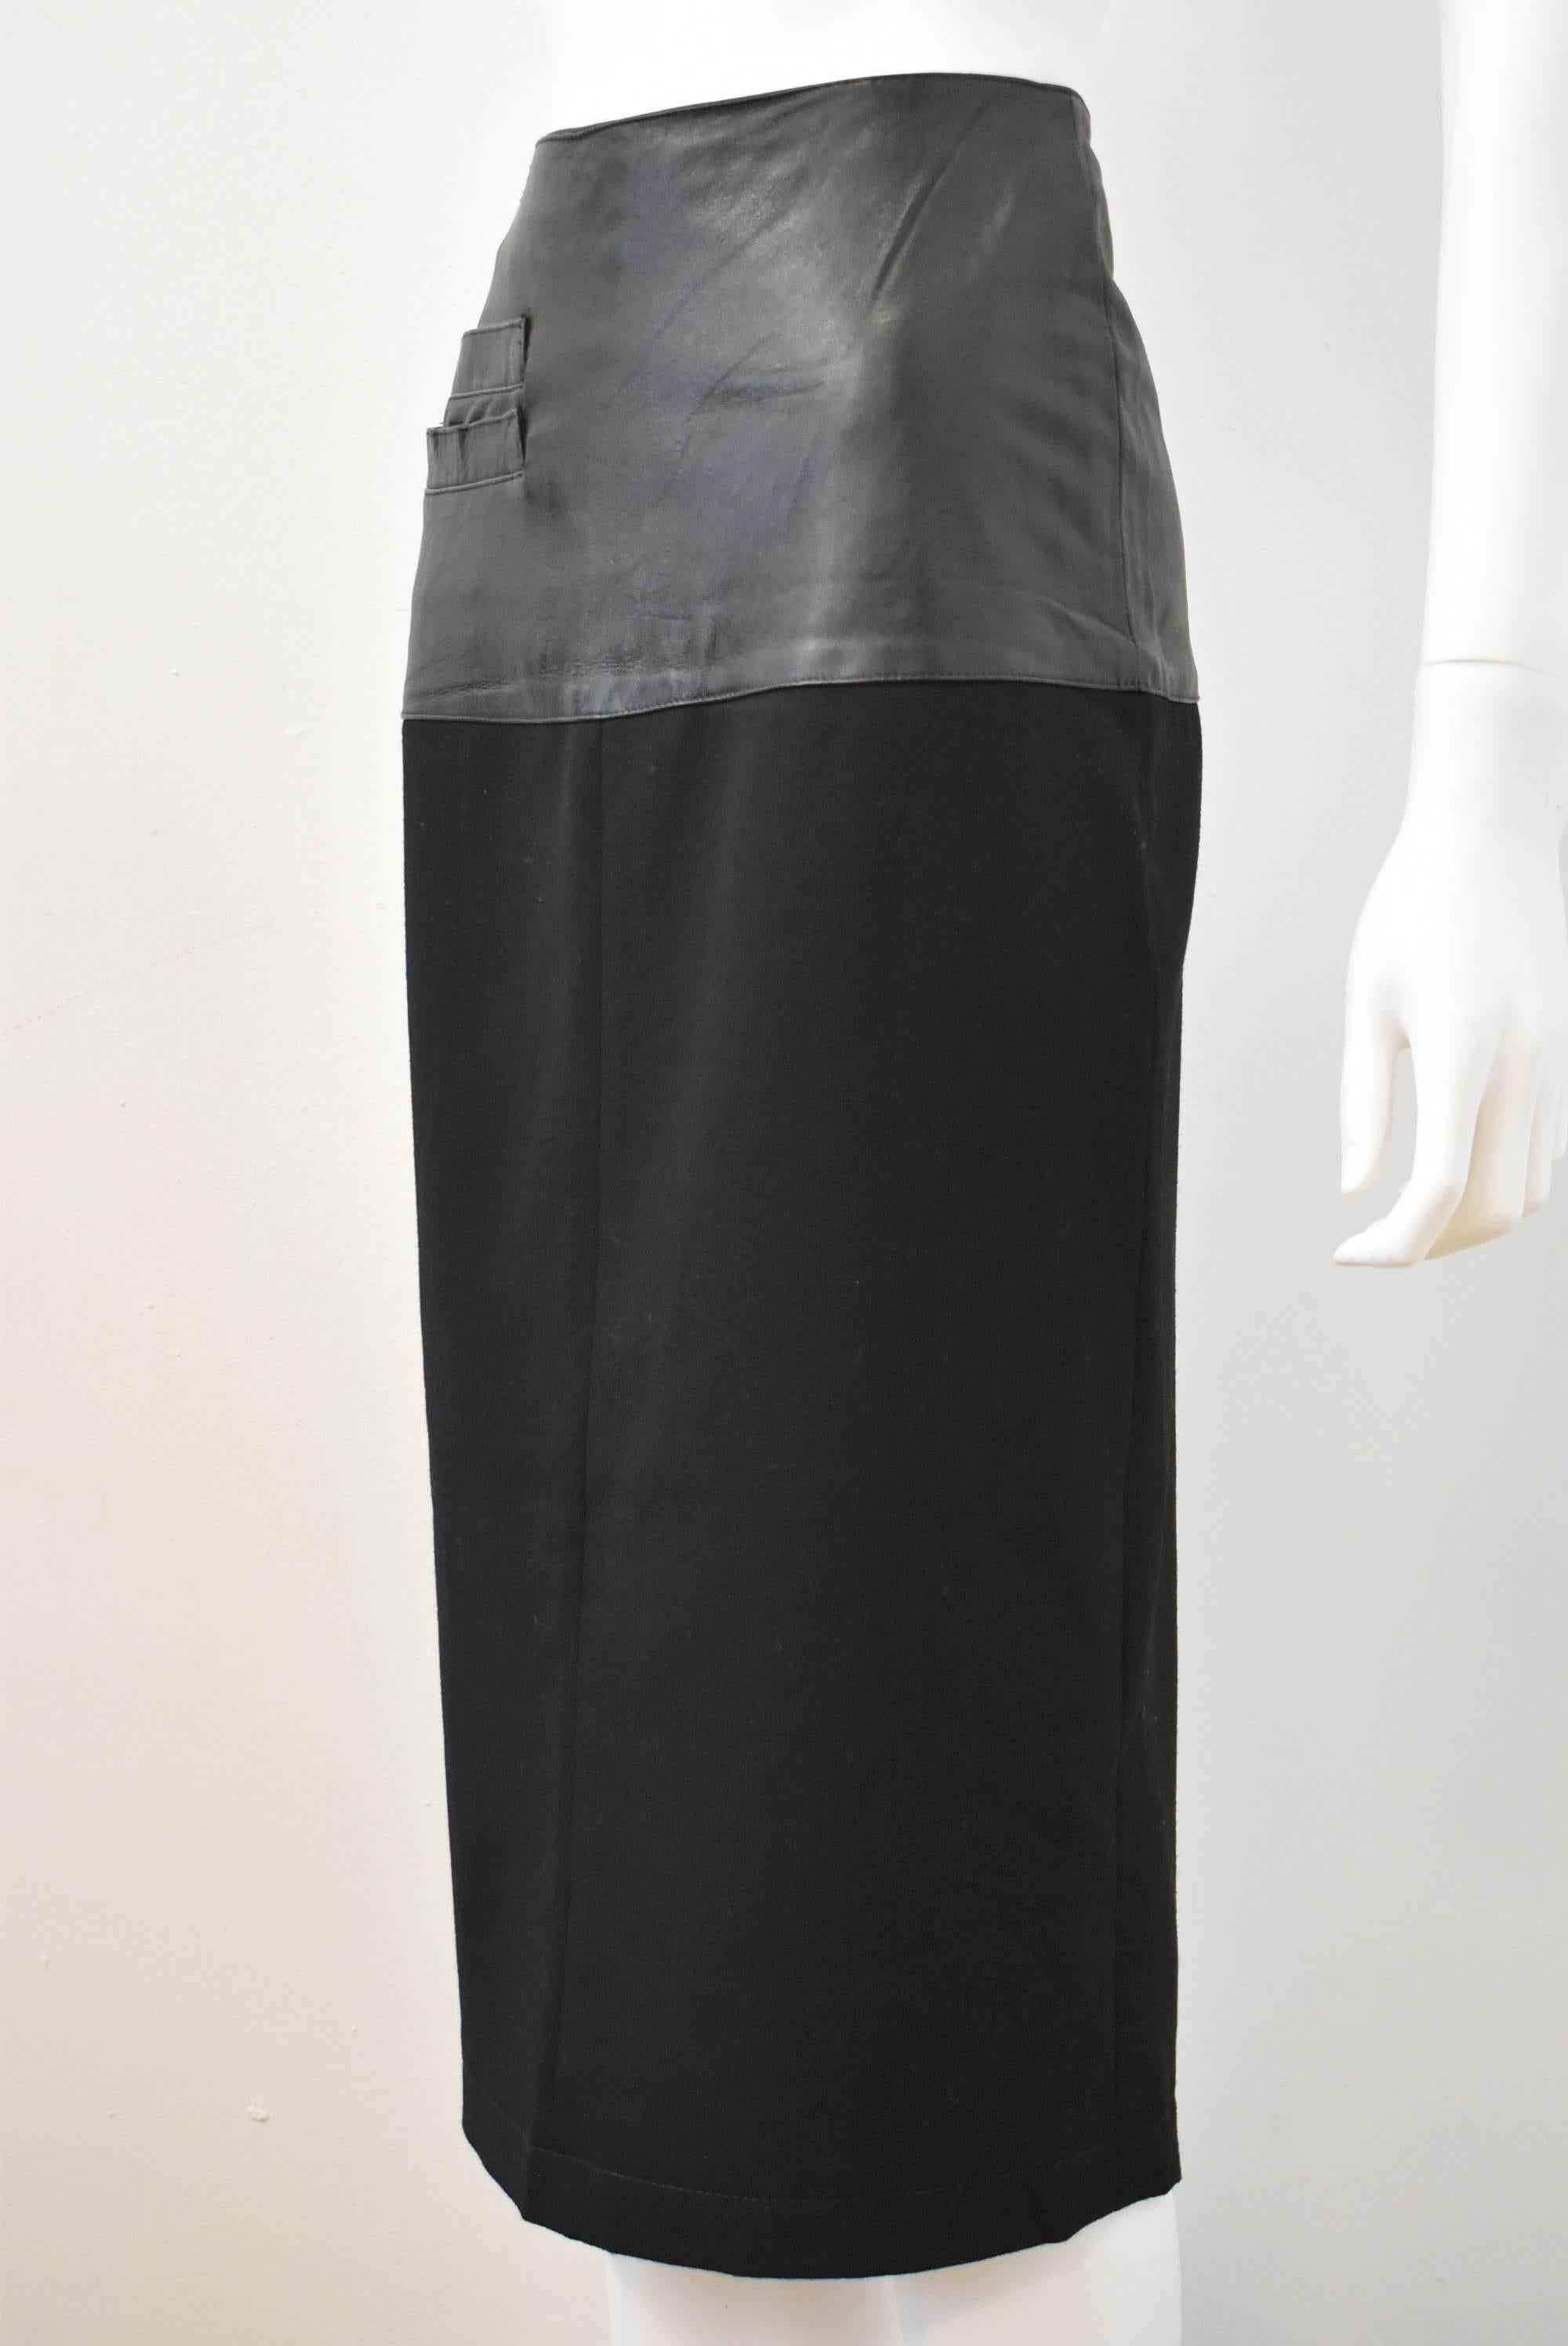 Black faux-leather and wool Claude Montana pencil skirt. The skirt has a leather panel around the waist and hips with an attached wool skirt. There is a pocket at the hip and a large slit at the back for ease of movement. It is in excellent vintage